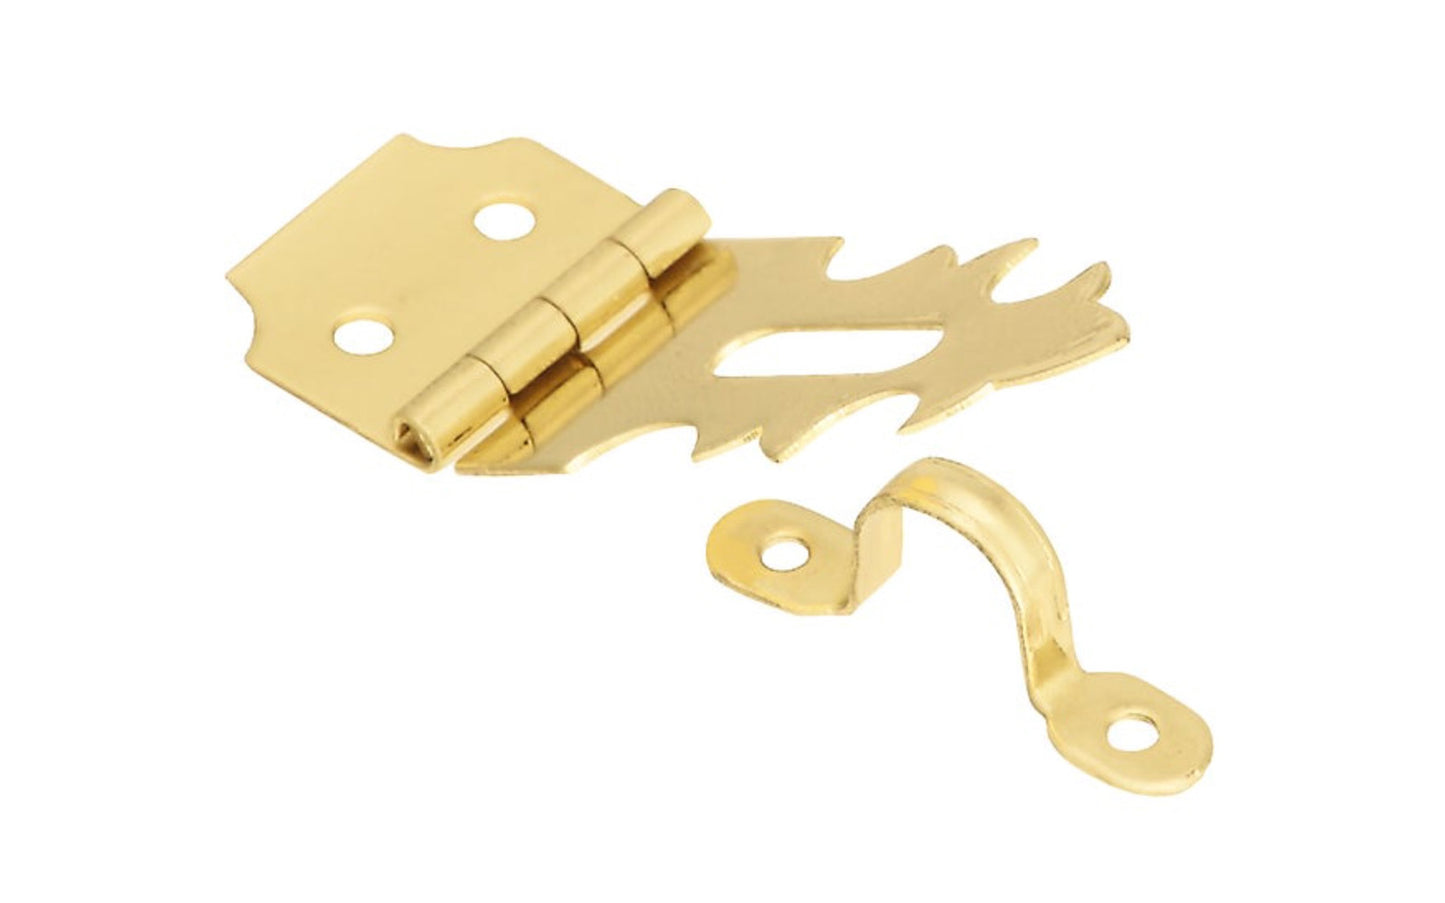 These small decorative hasps are designed to add a decorative appearance to small chests, jewelry boxes, craft projects, etc. Sold as one hasp in pack. Solid Brass. Bright Brass